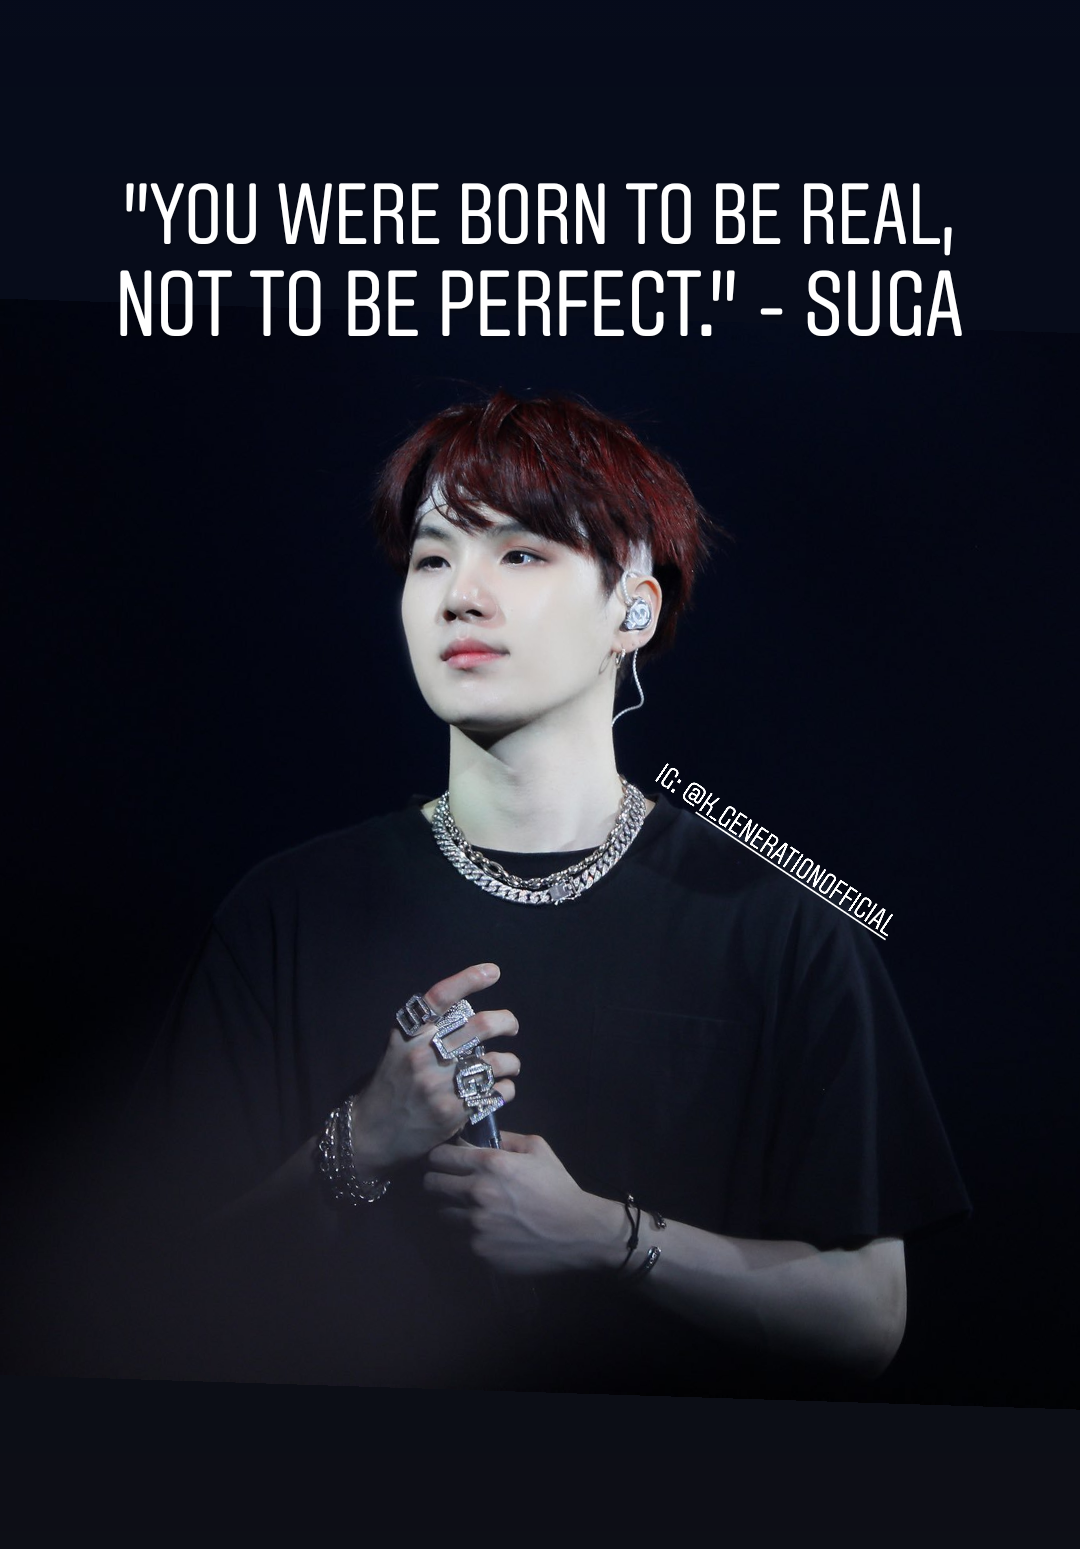 You were born to be real, not to be perfect suga quote hoodie